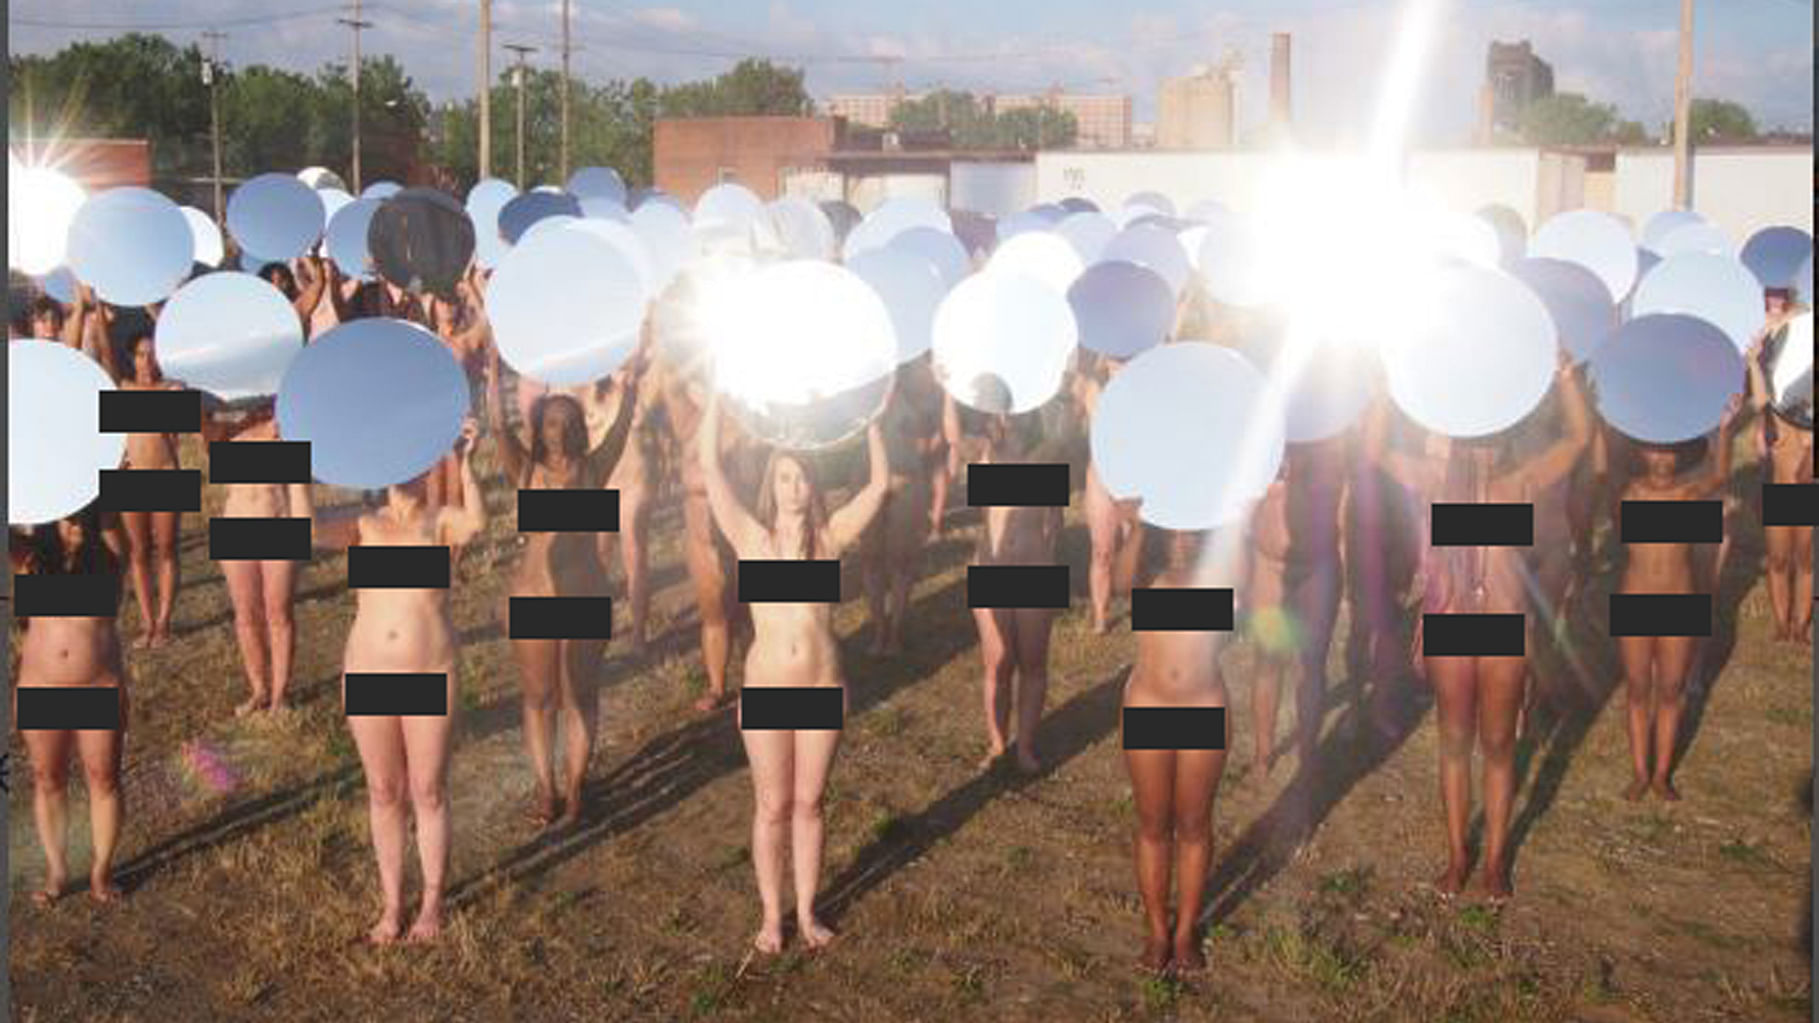 The women posed nude at dawn in Cleveland, Ohio. (Photo Courtesy:&nbsp;<a href="http://spencertunickcleveland.com/">Spencertunickcleveland</a>)